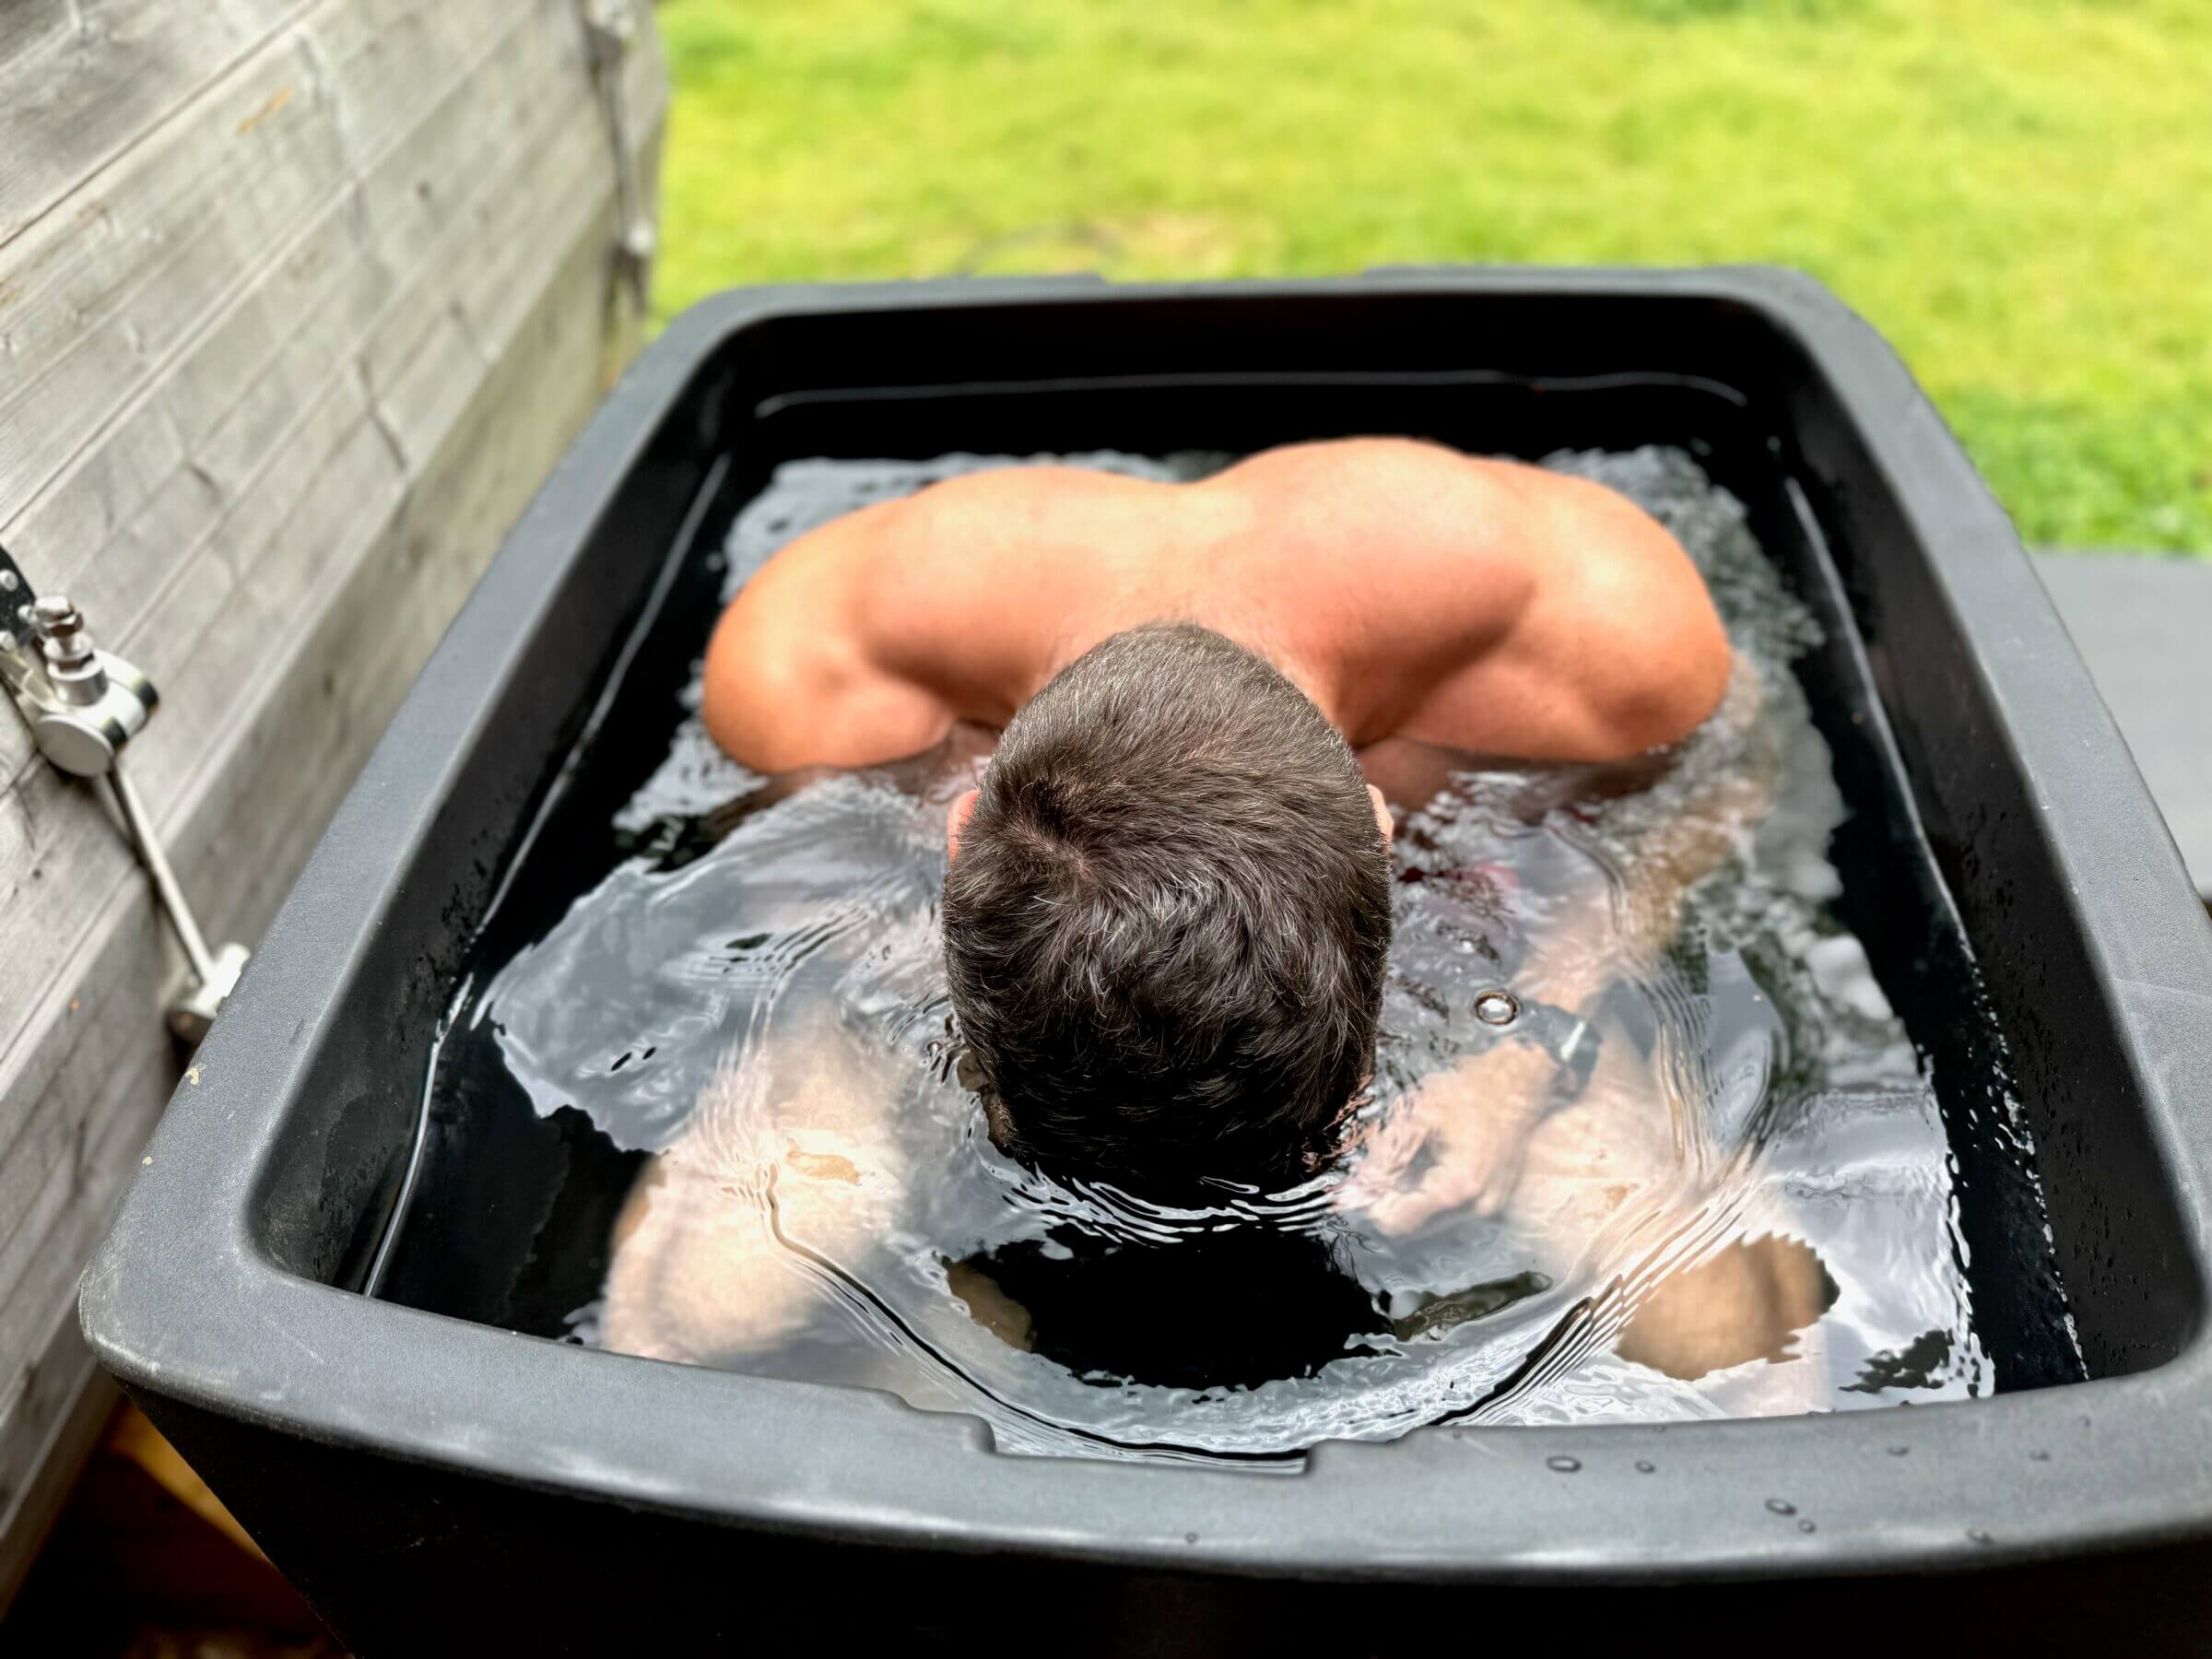 The Ice Barrel 500 makes it difficult to submerge my head under water.